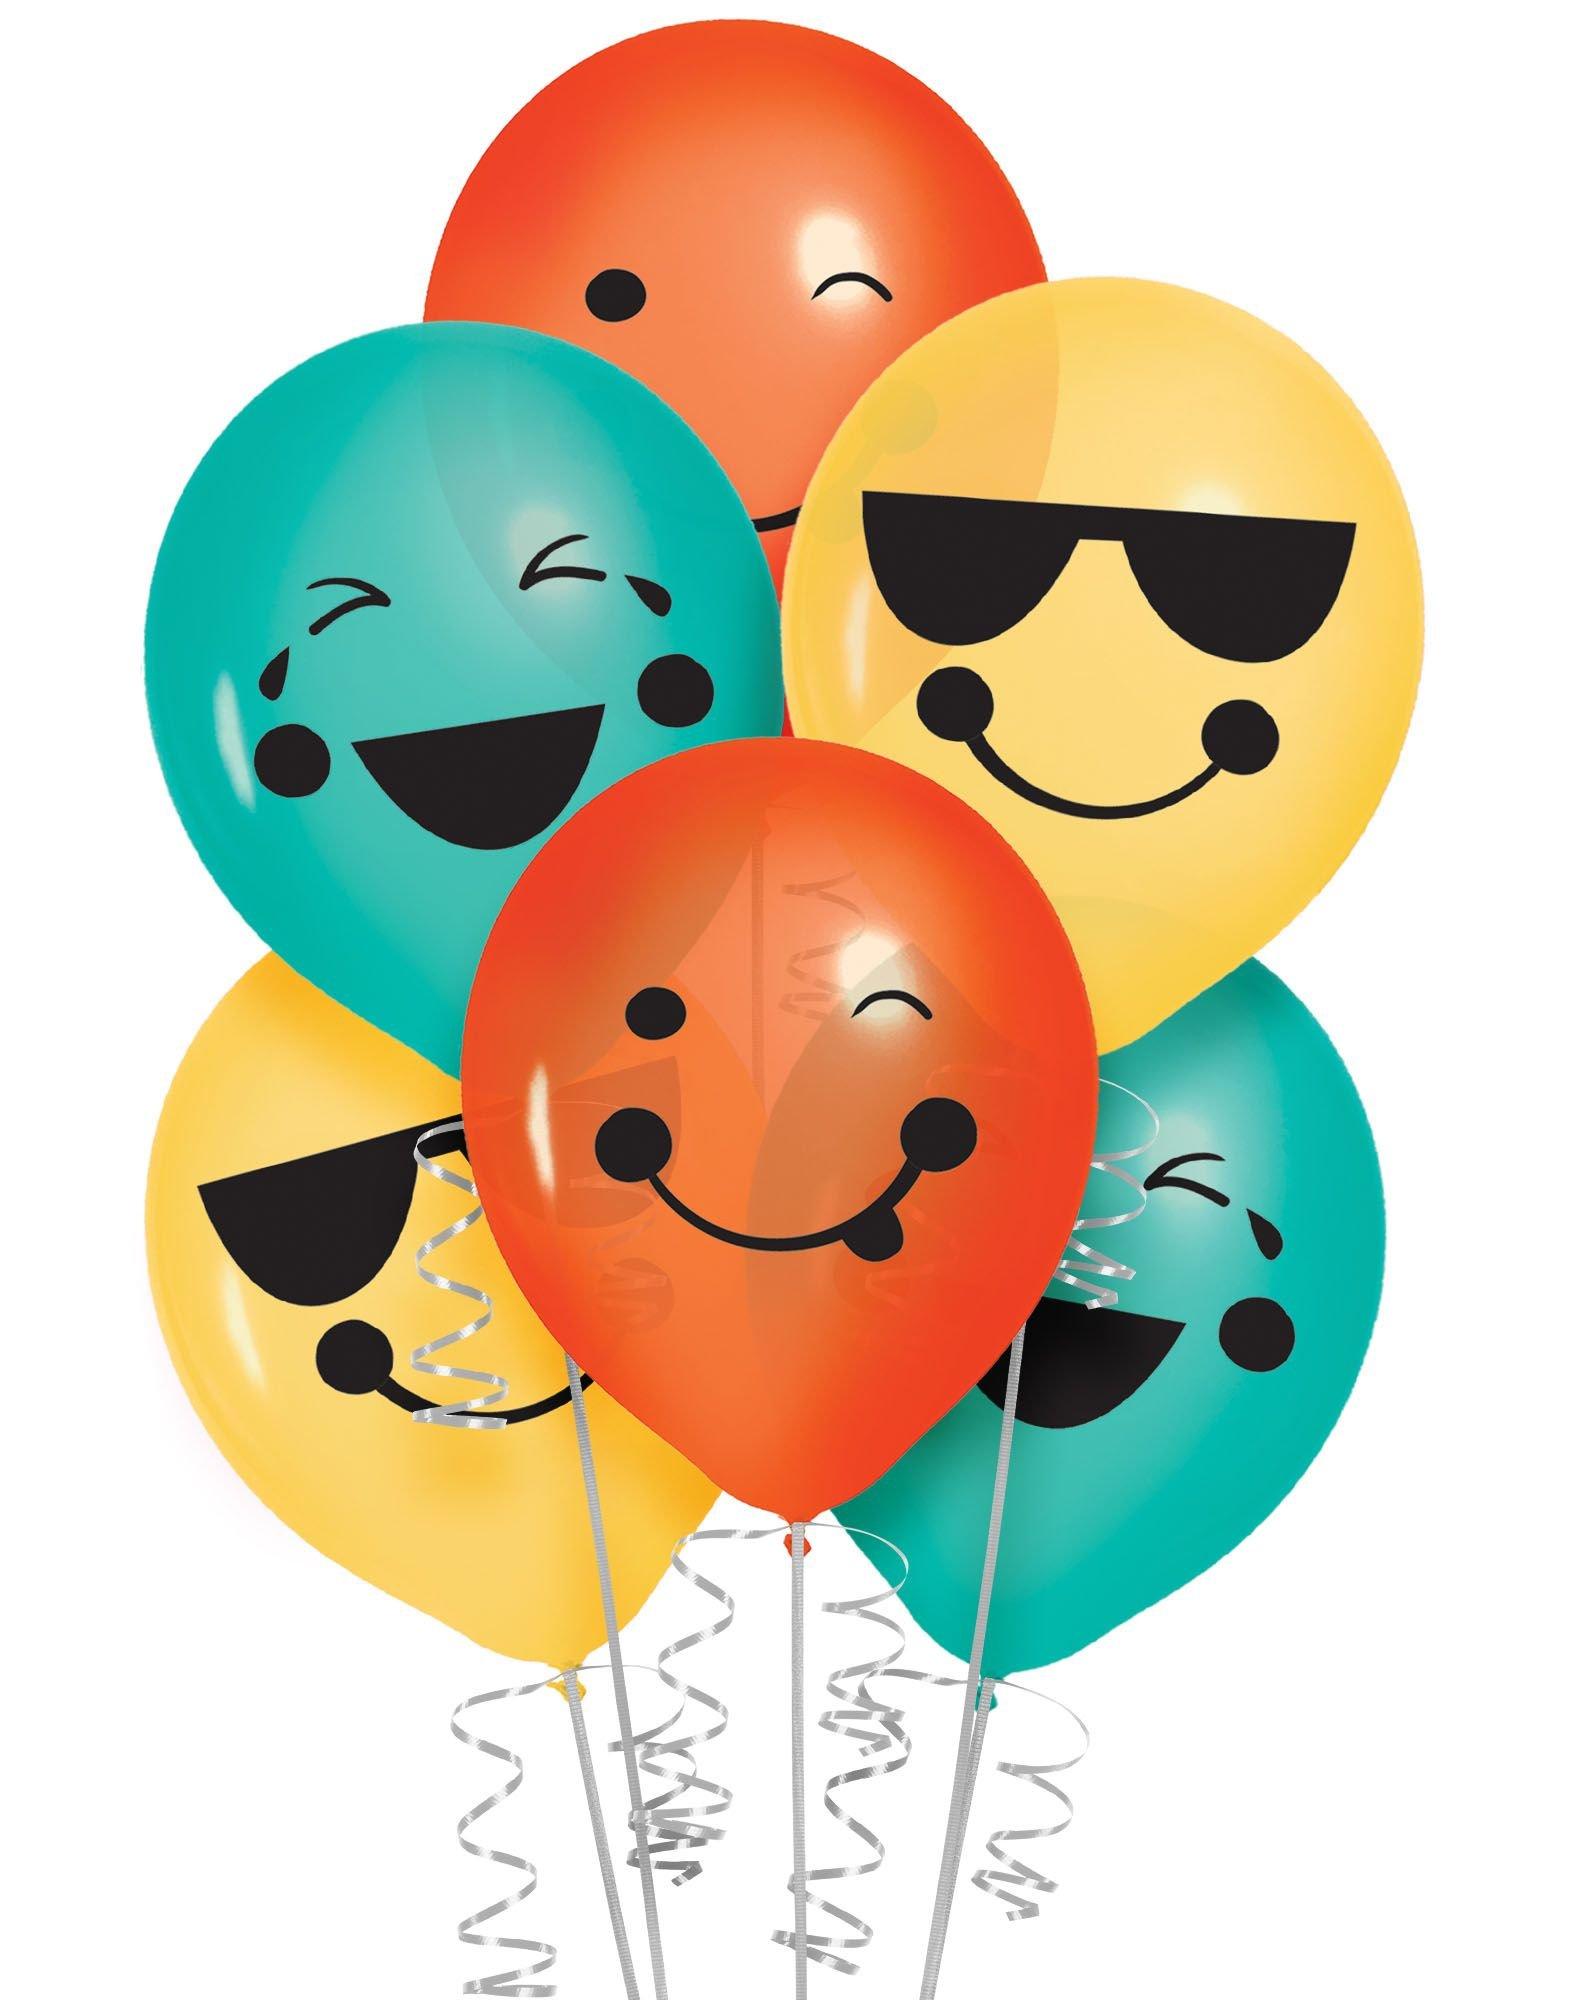 6ct, 12in, All Smiles Smiley Face Latex Balloons